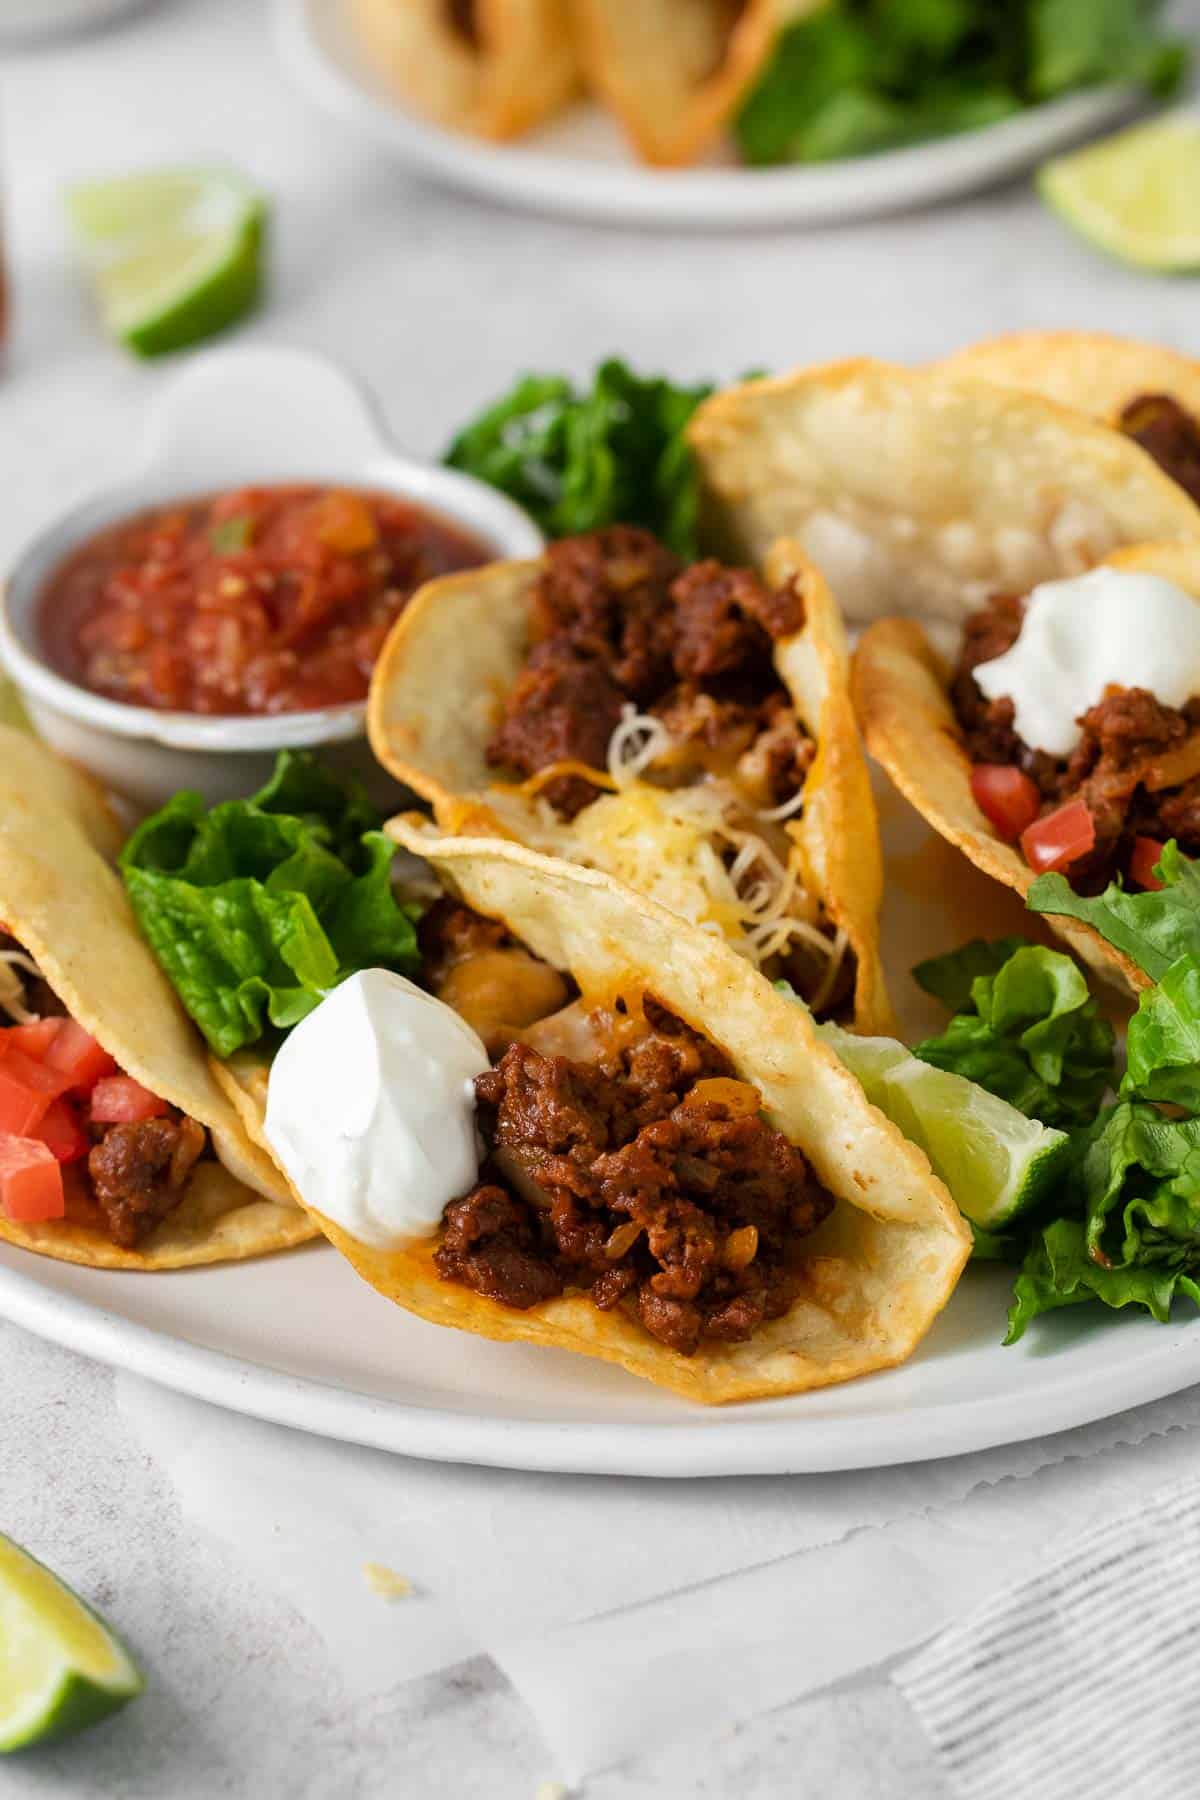 Gluten-free tacos and salsa on a plate